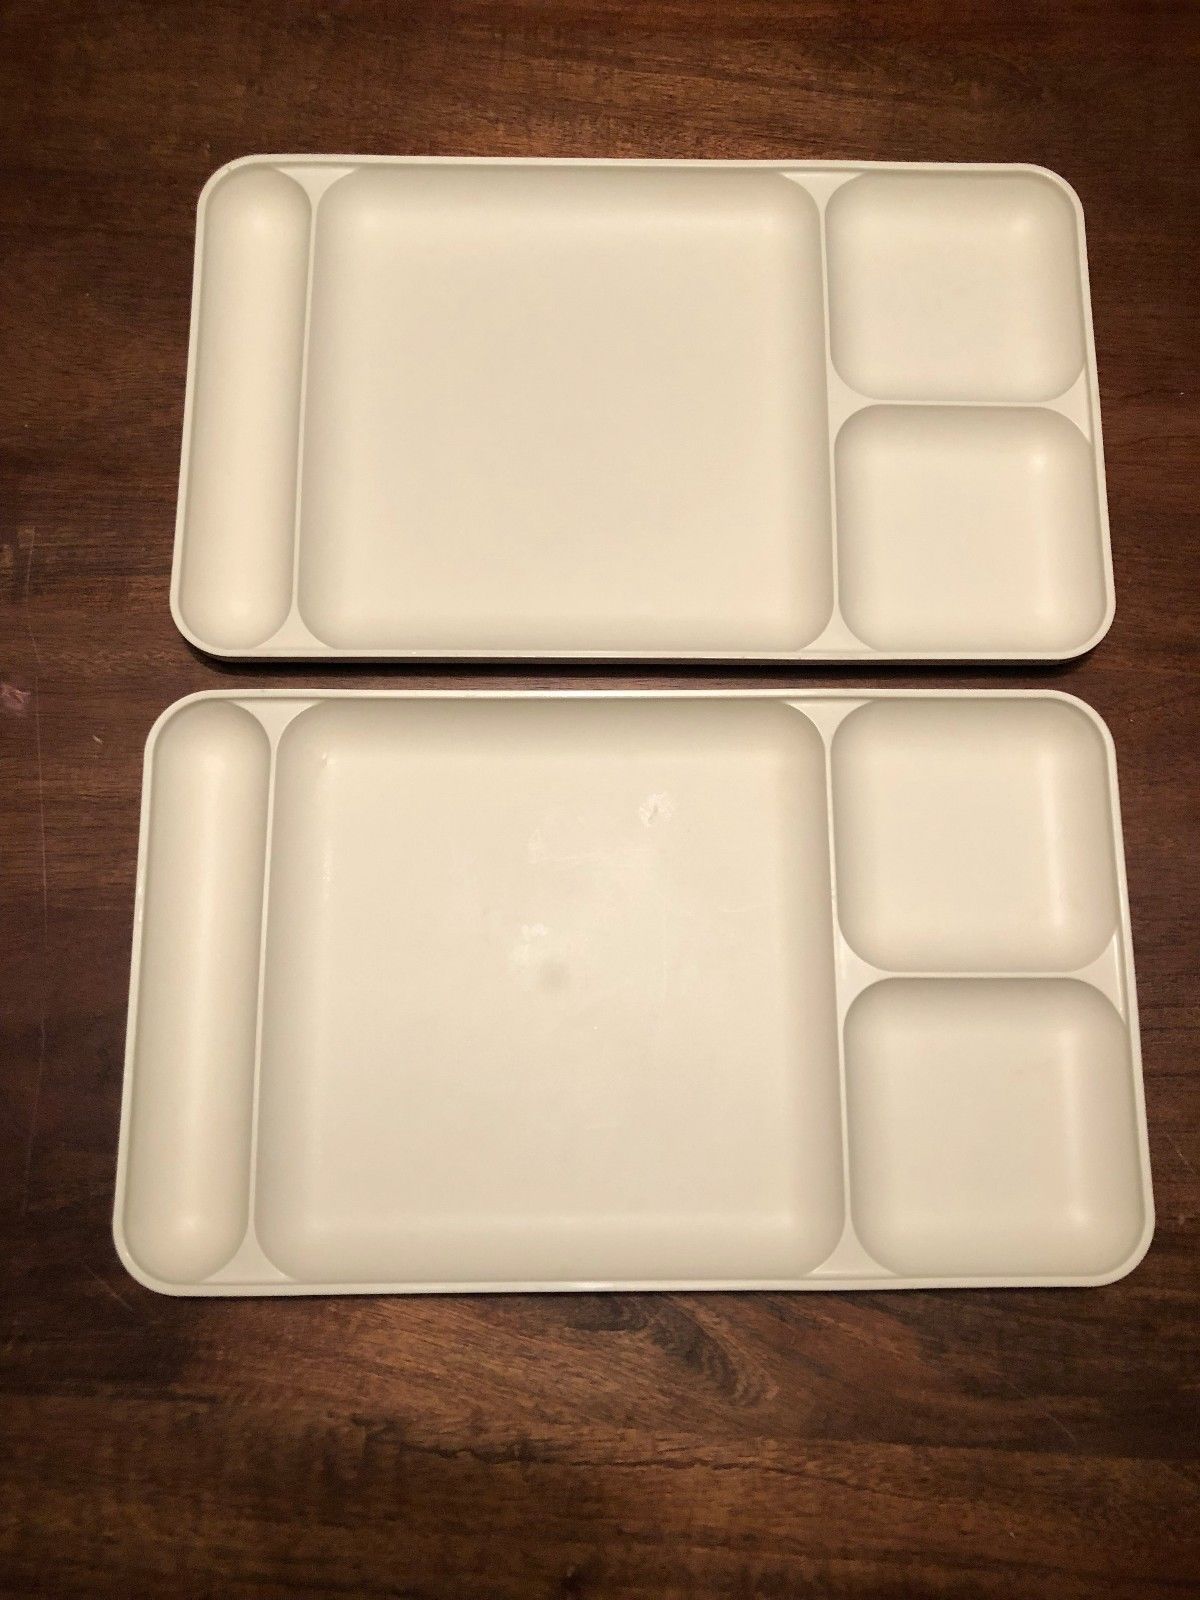 Vintage Sets of 4 Tupperware Plastic Divided Trays in MULTIPLE